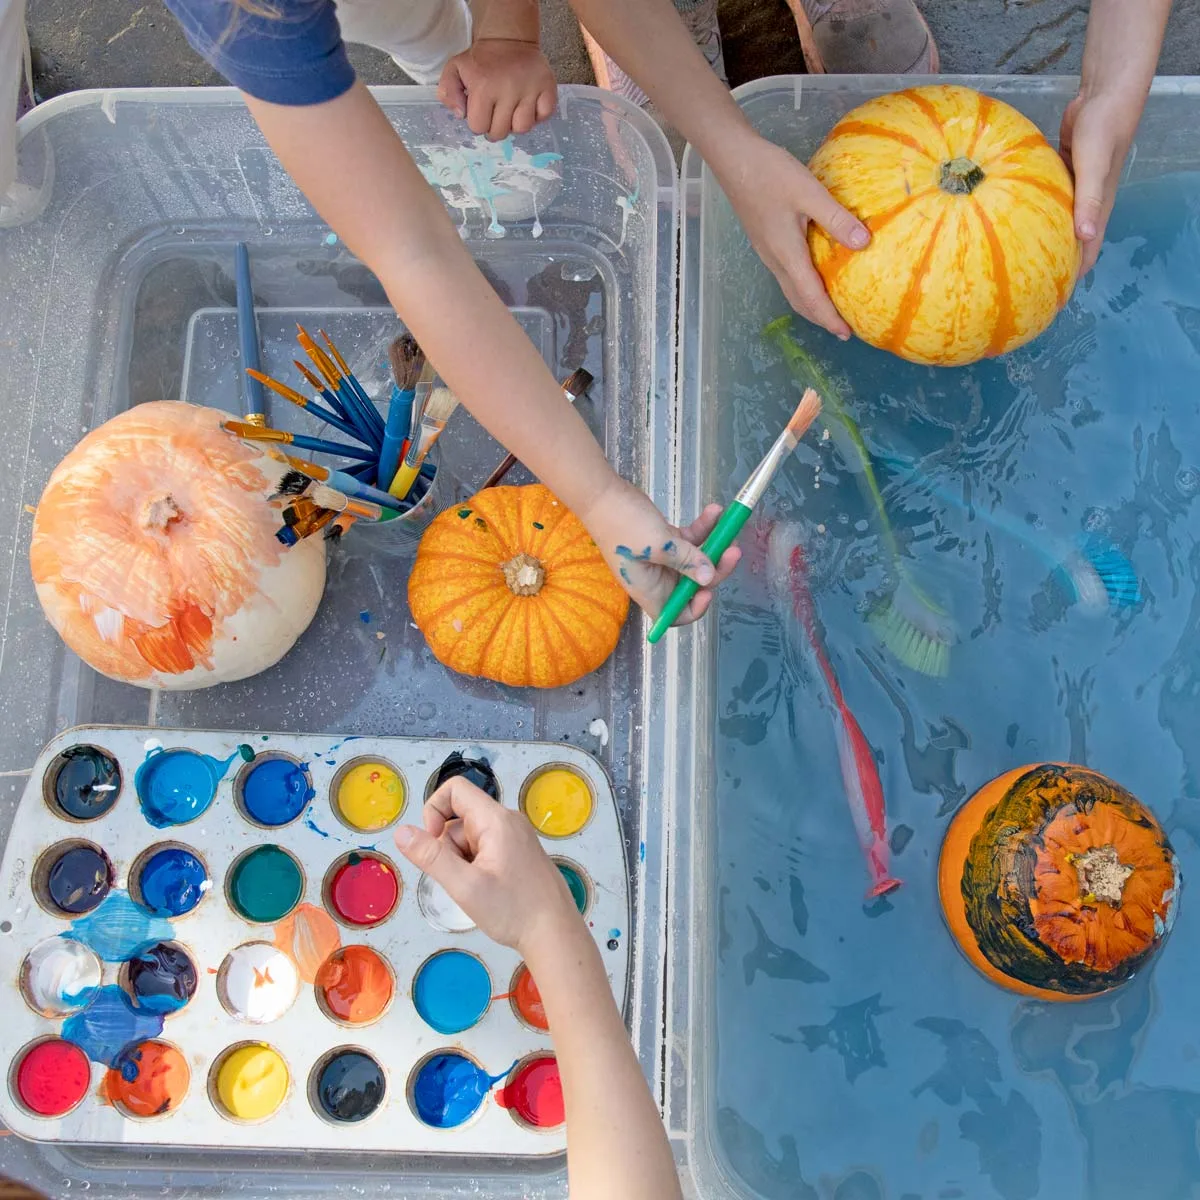 Three kids paint and wash pumpkins. There are 4 pumpkins, paint, and water in the photo.